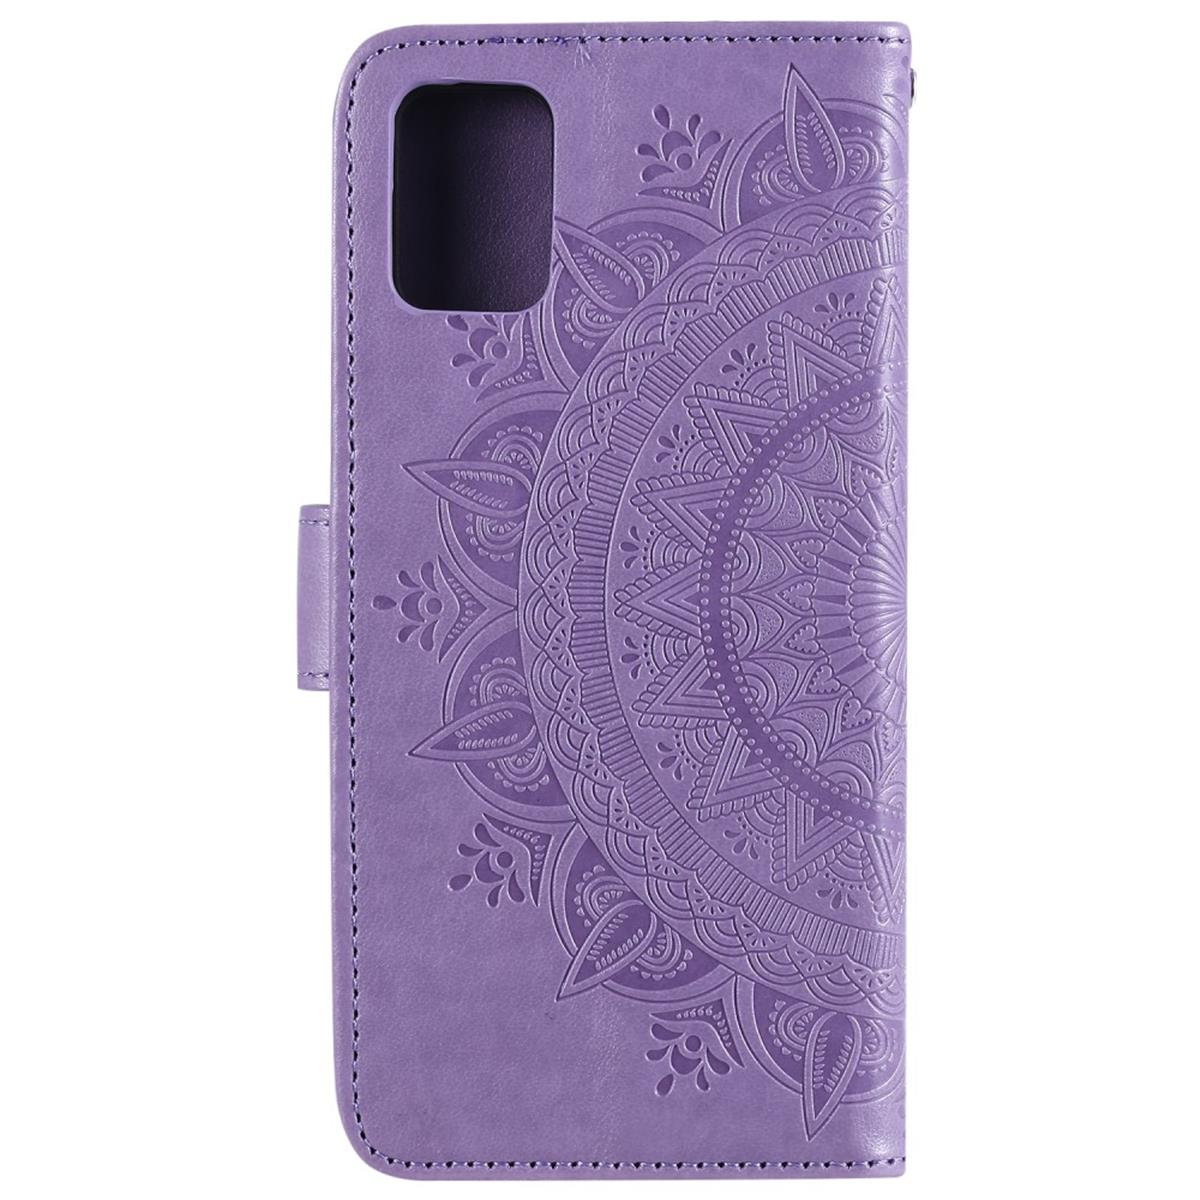 COVERKINGZ Klapphülle mit Mandala Samsung, Galaxy Muster, Lila Note20, Bookcover